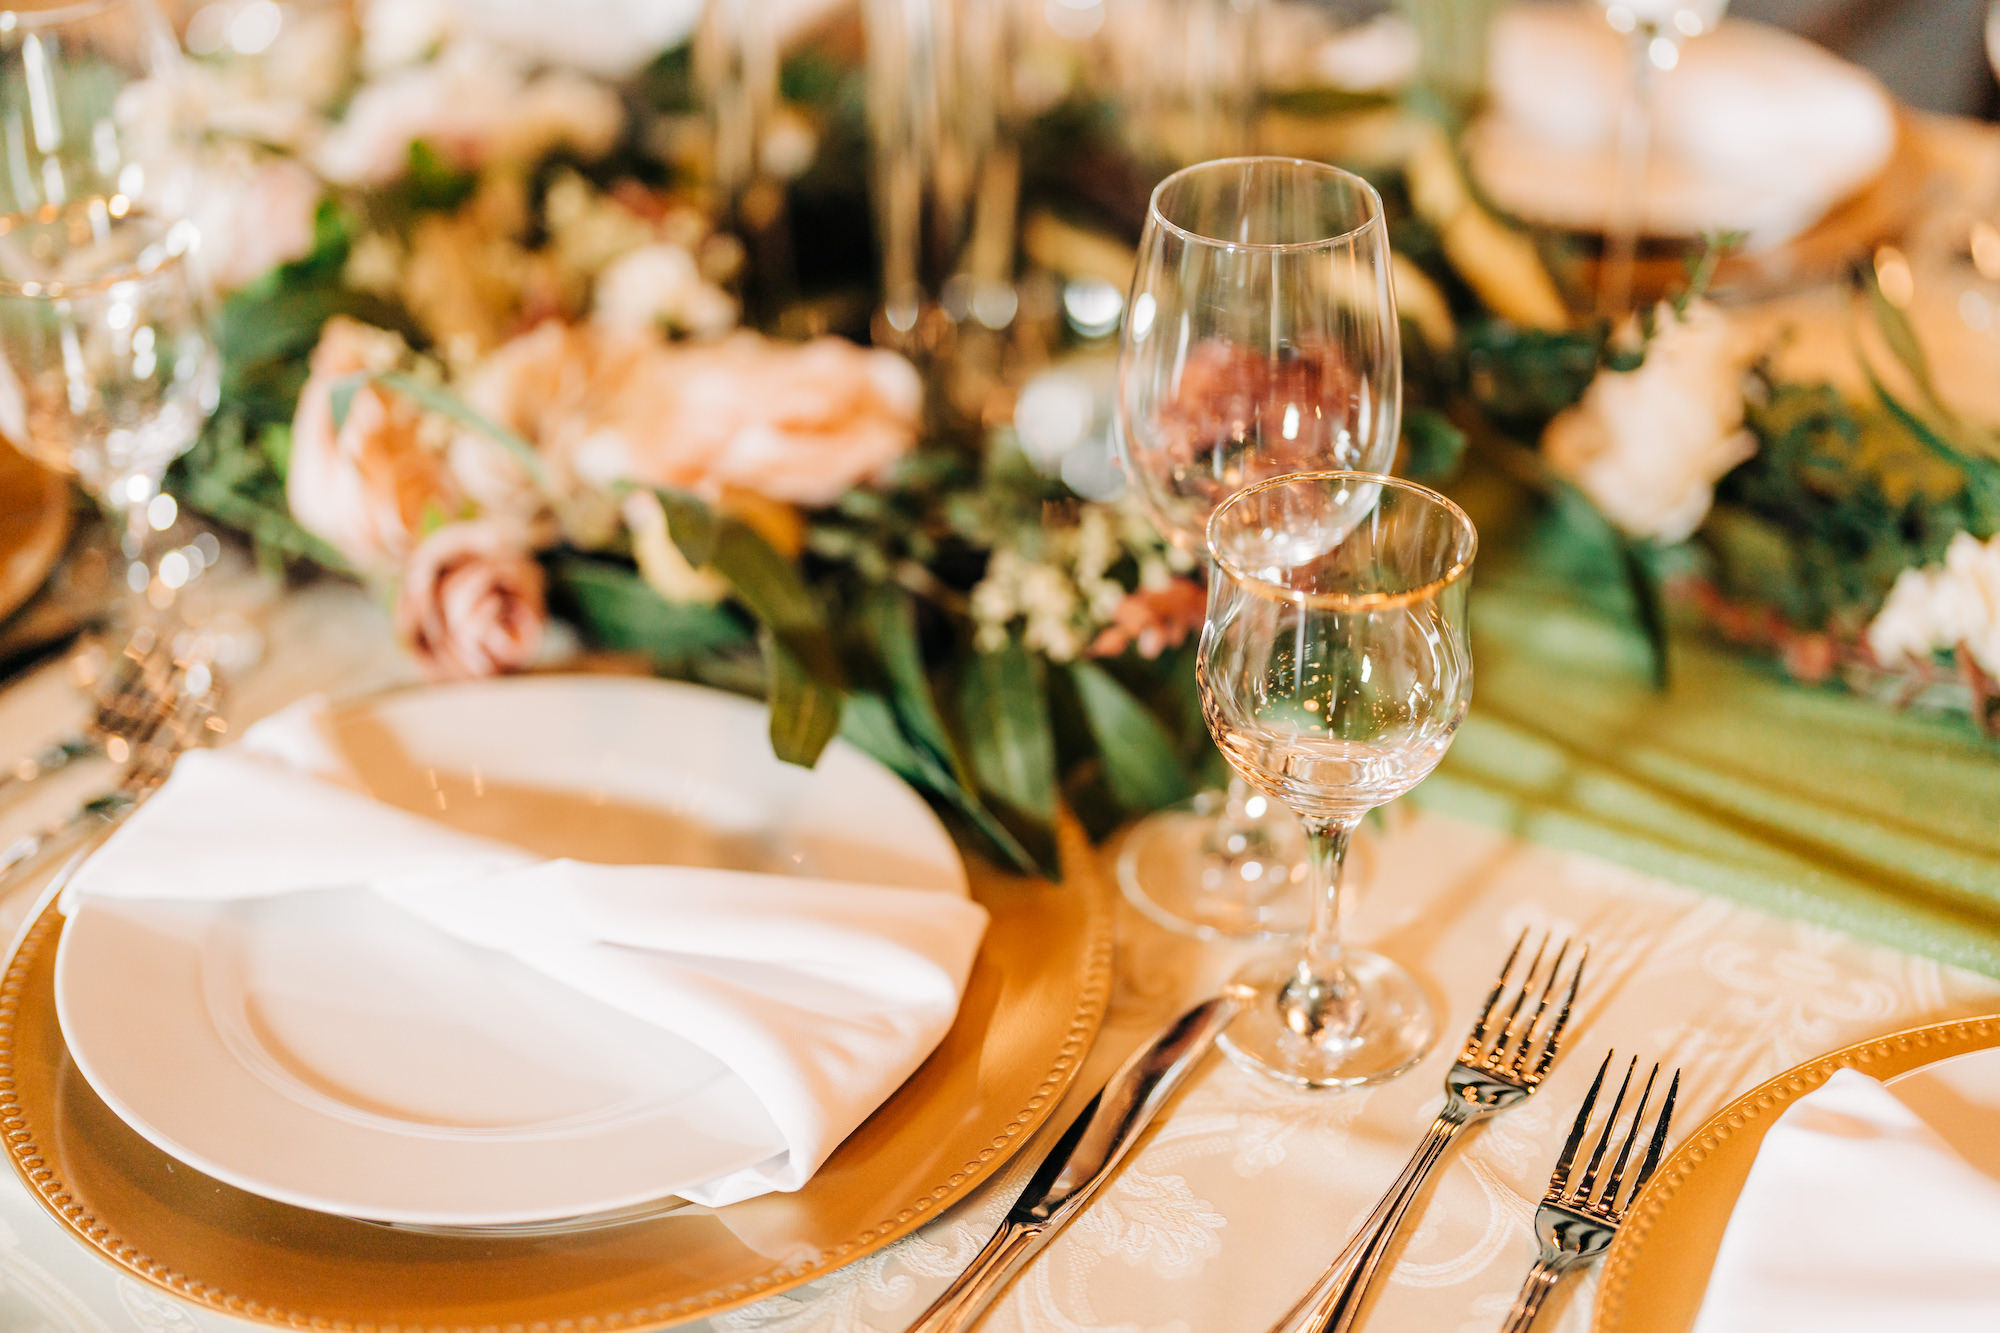 Gold Chargers and Flatware Table Setting Ideas | Elegant Wedding Tablescape Inspiration | Tampa Bay Rental Elite Events Catering